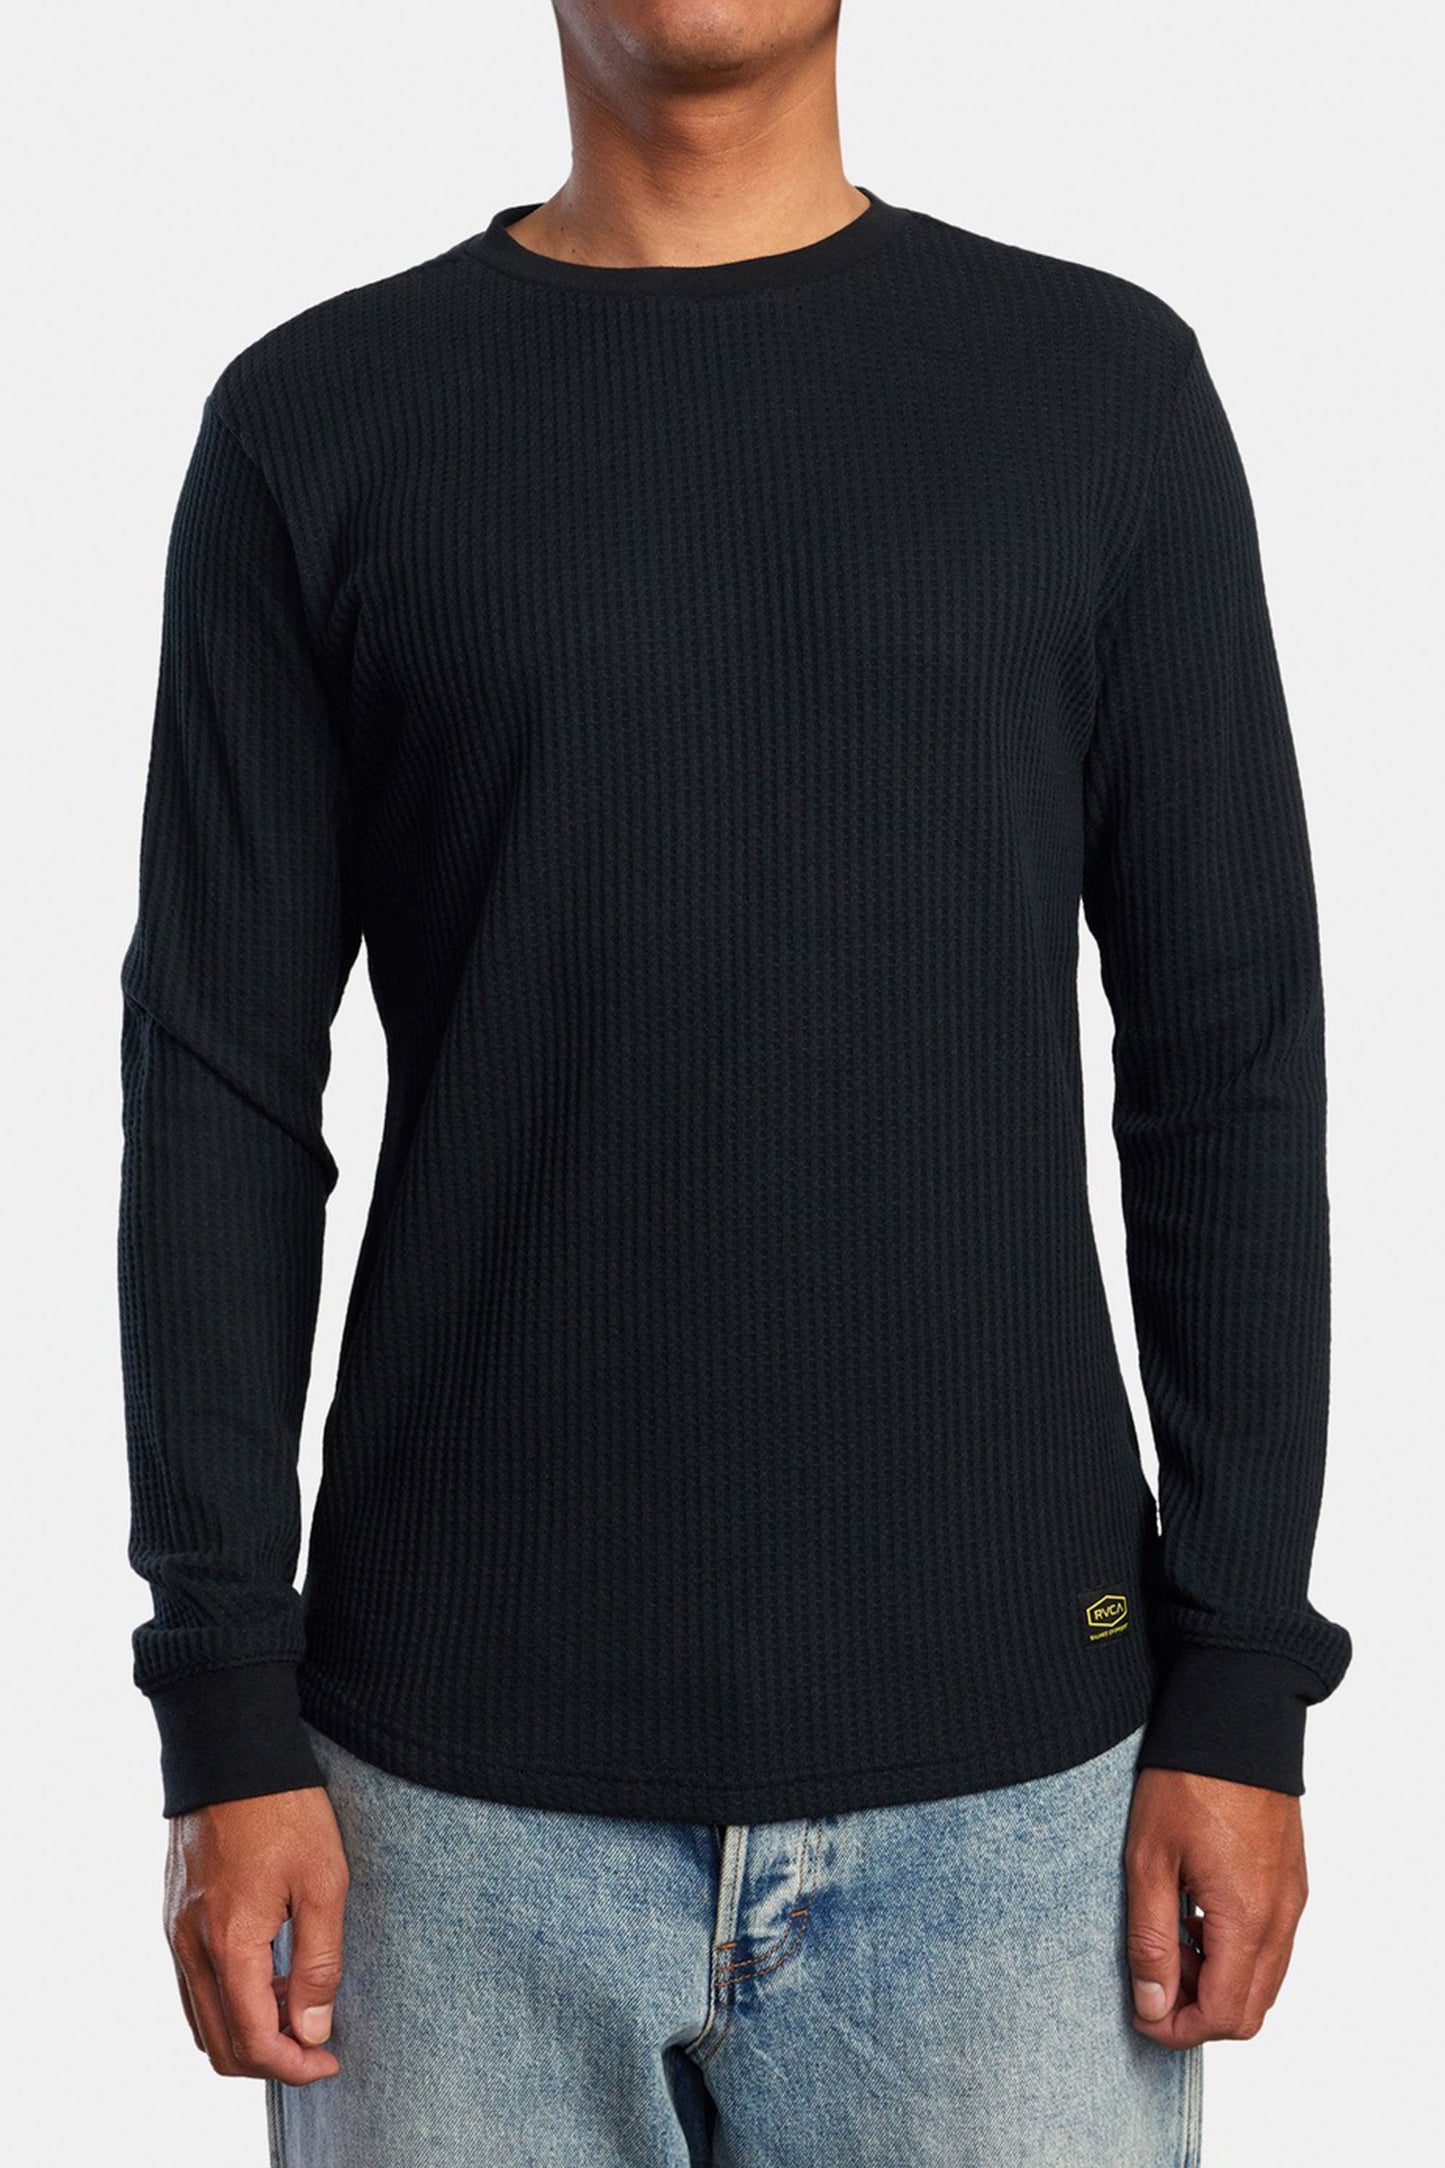 Pukas-Surf-Shop-RVCA-Sweater-Day-Shift-Thermal-Black